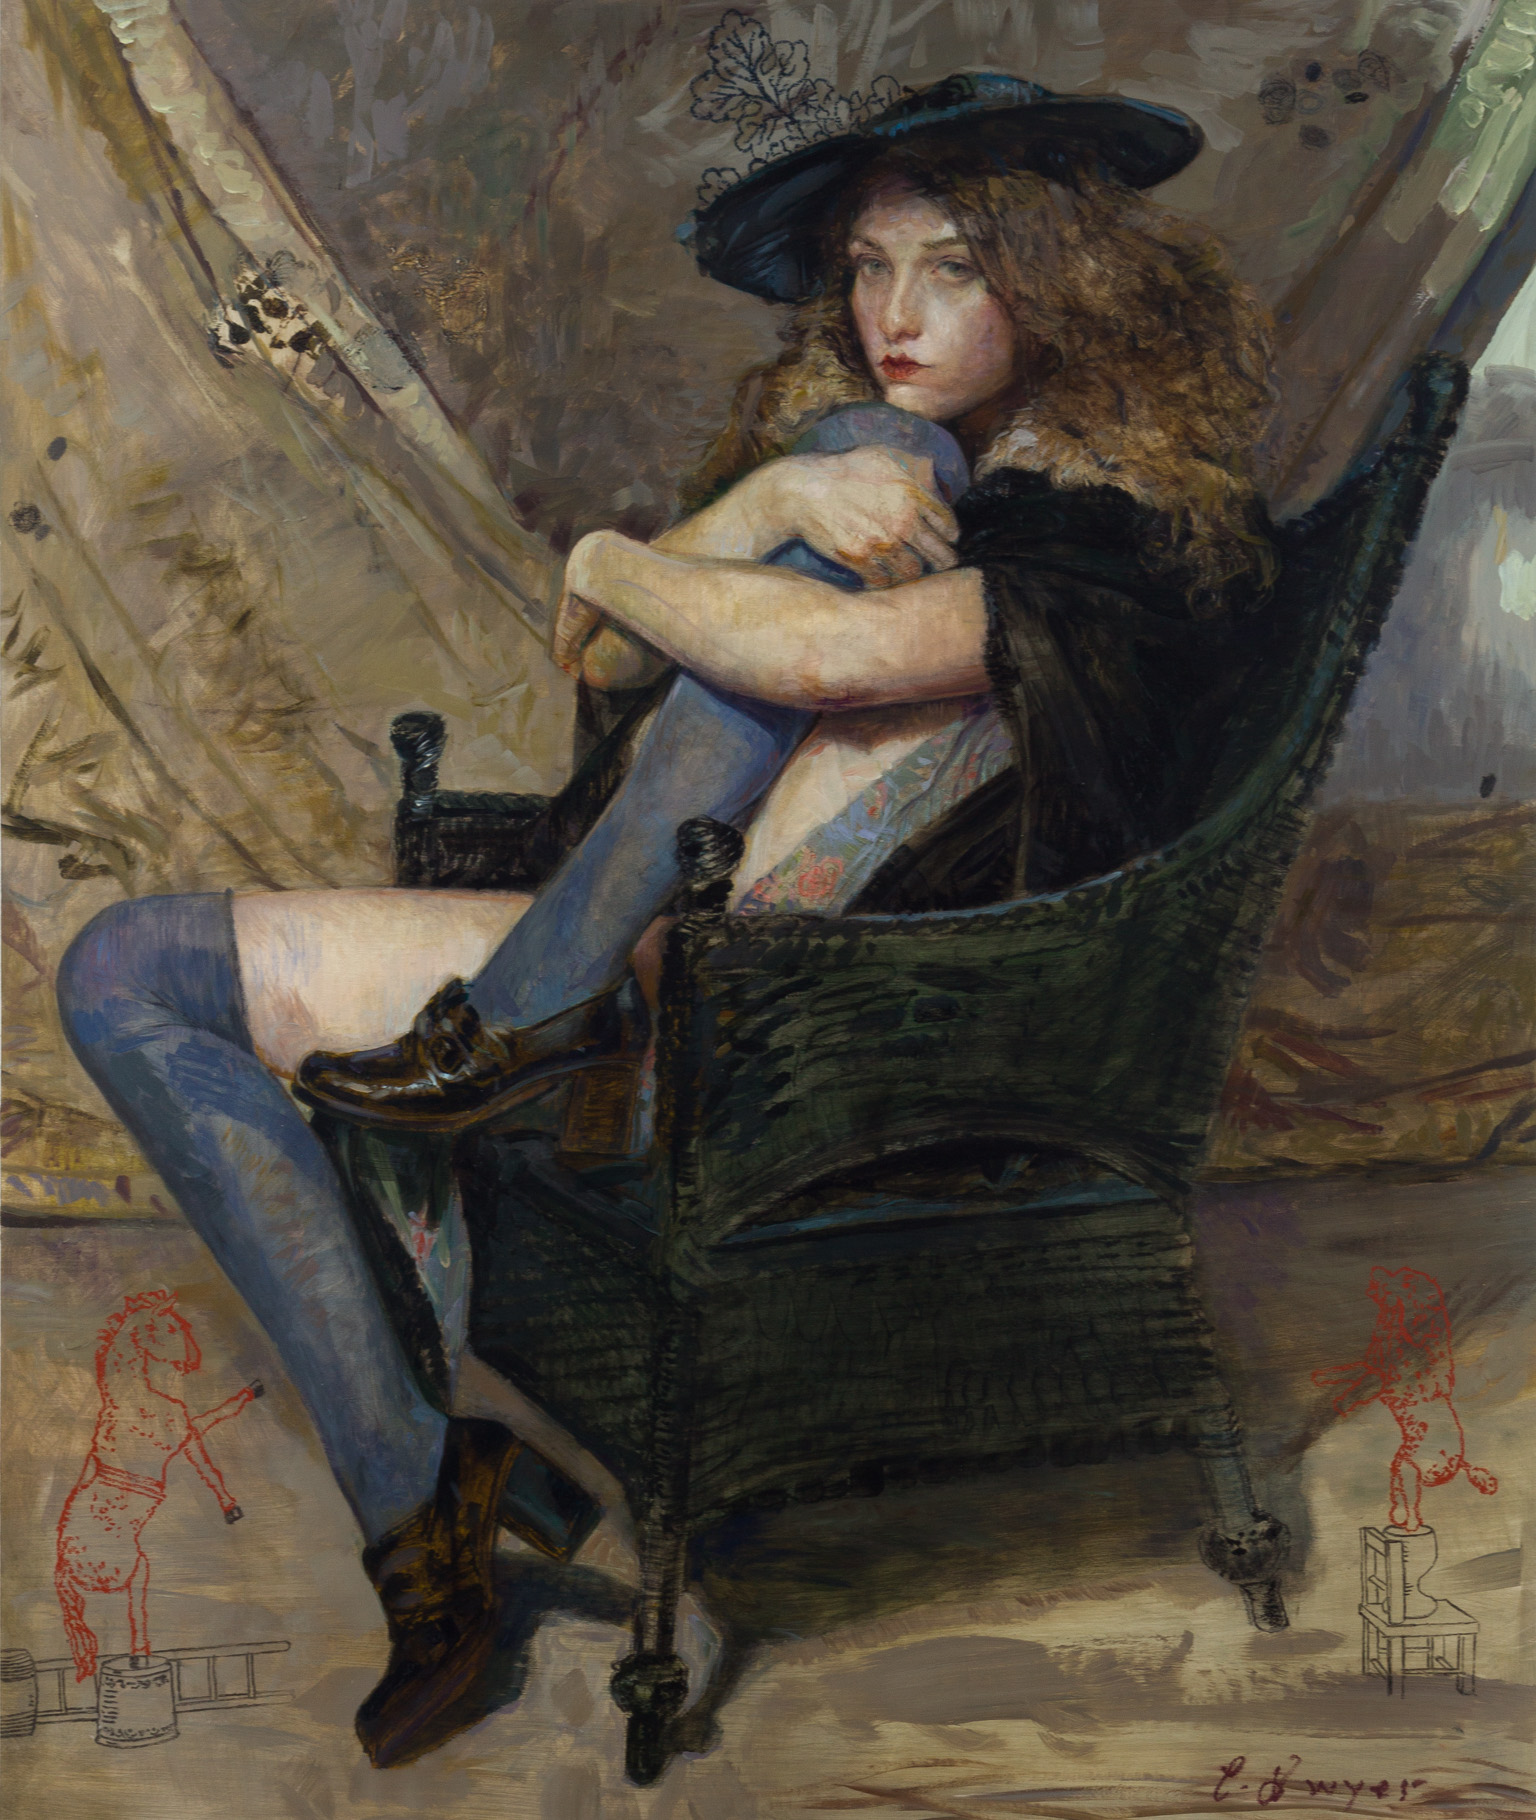 Dwyer, "Vera Seated," Oil on Canvas, 53 x 44 in. 